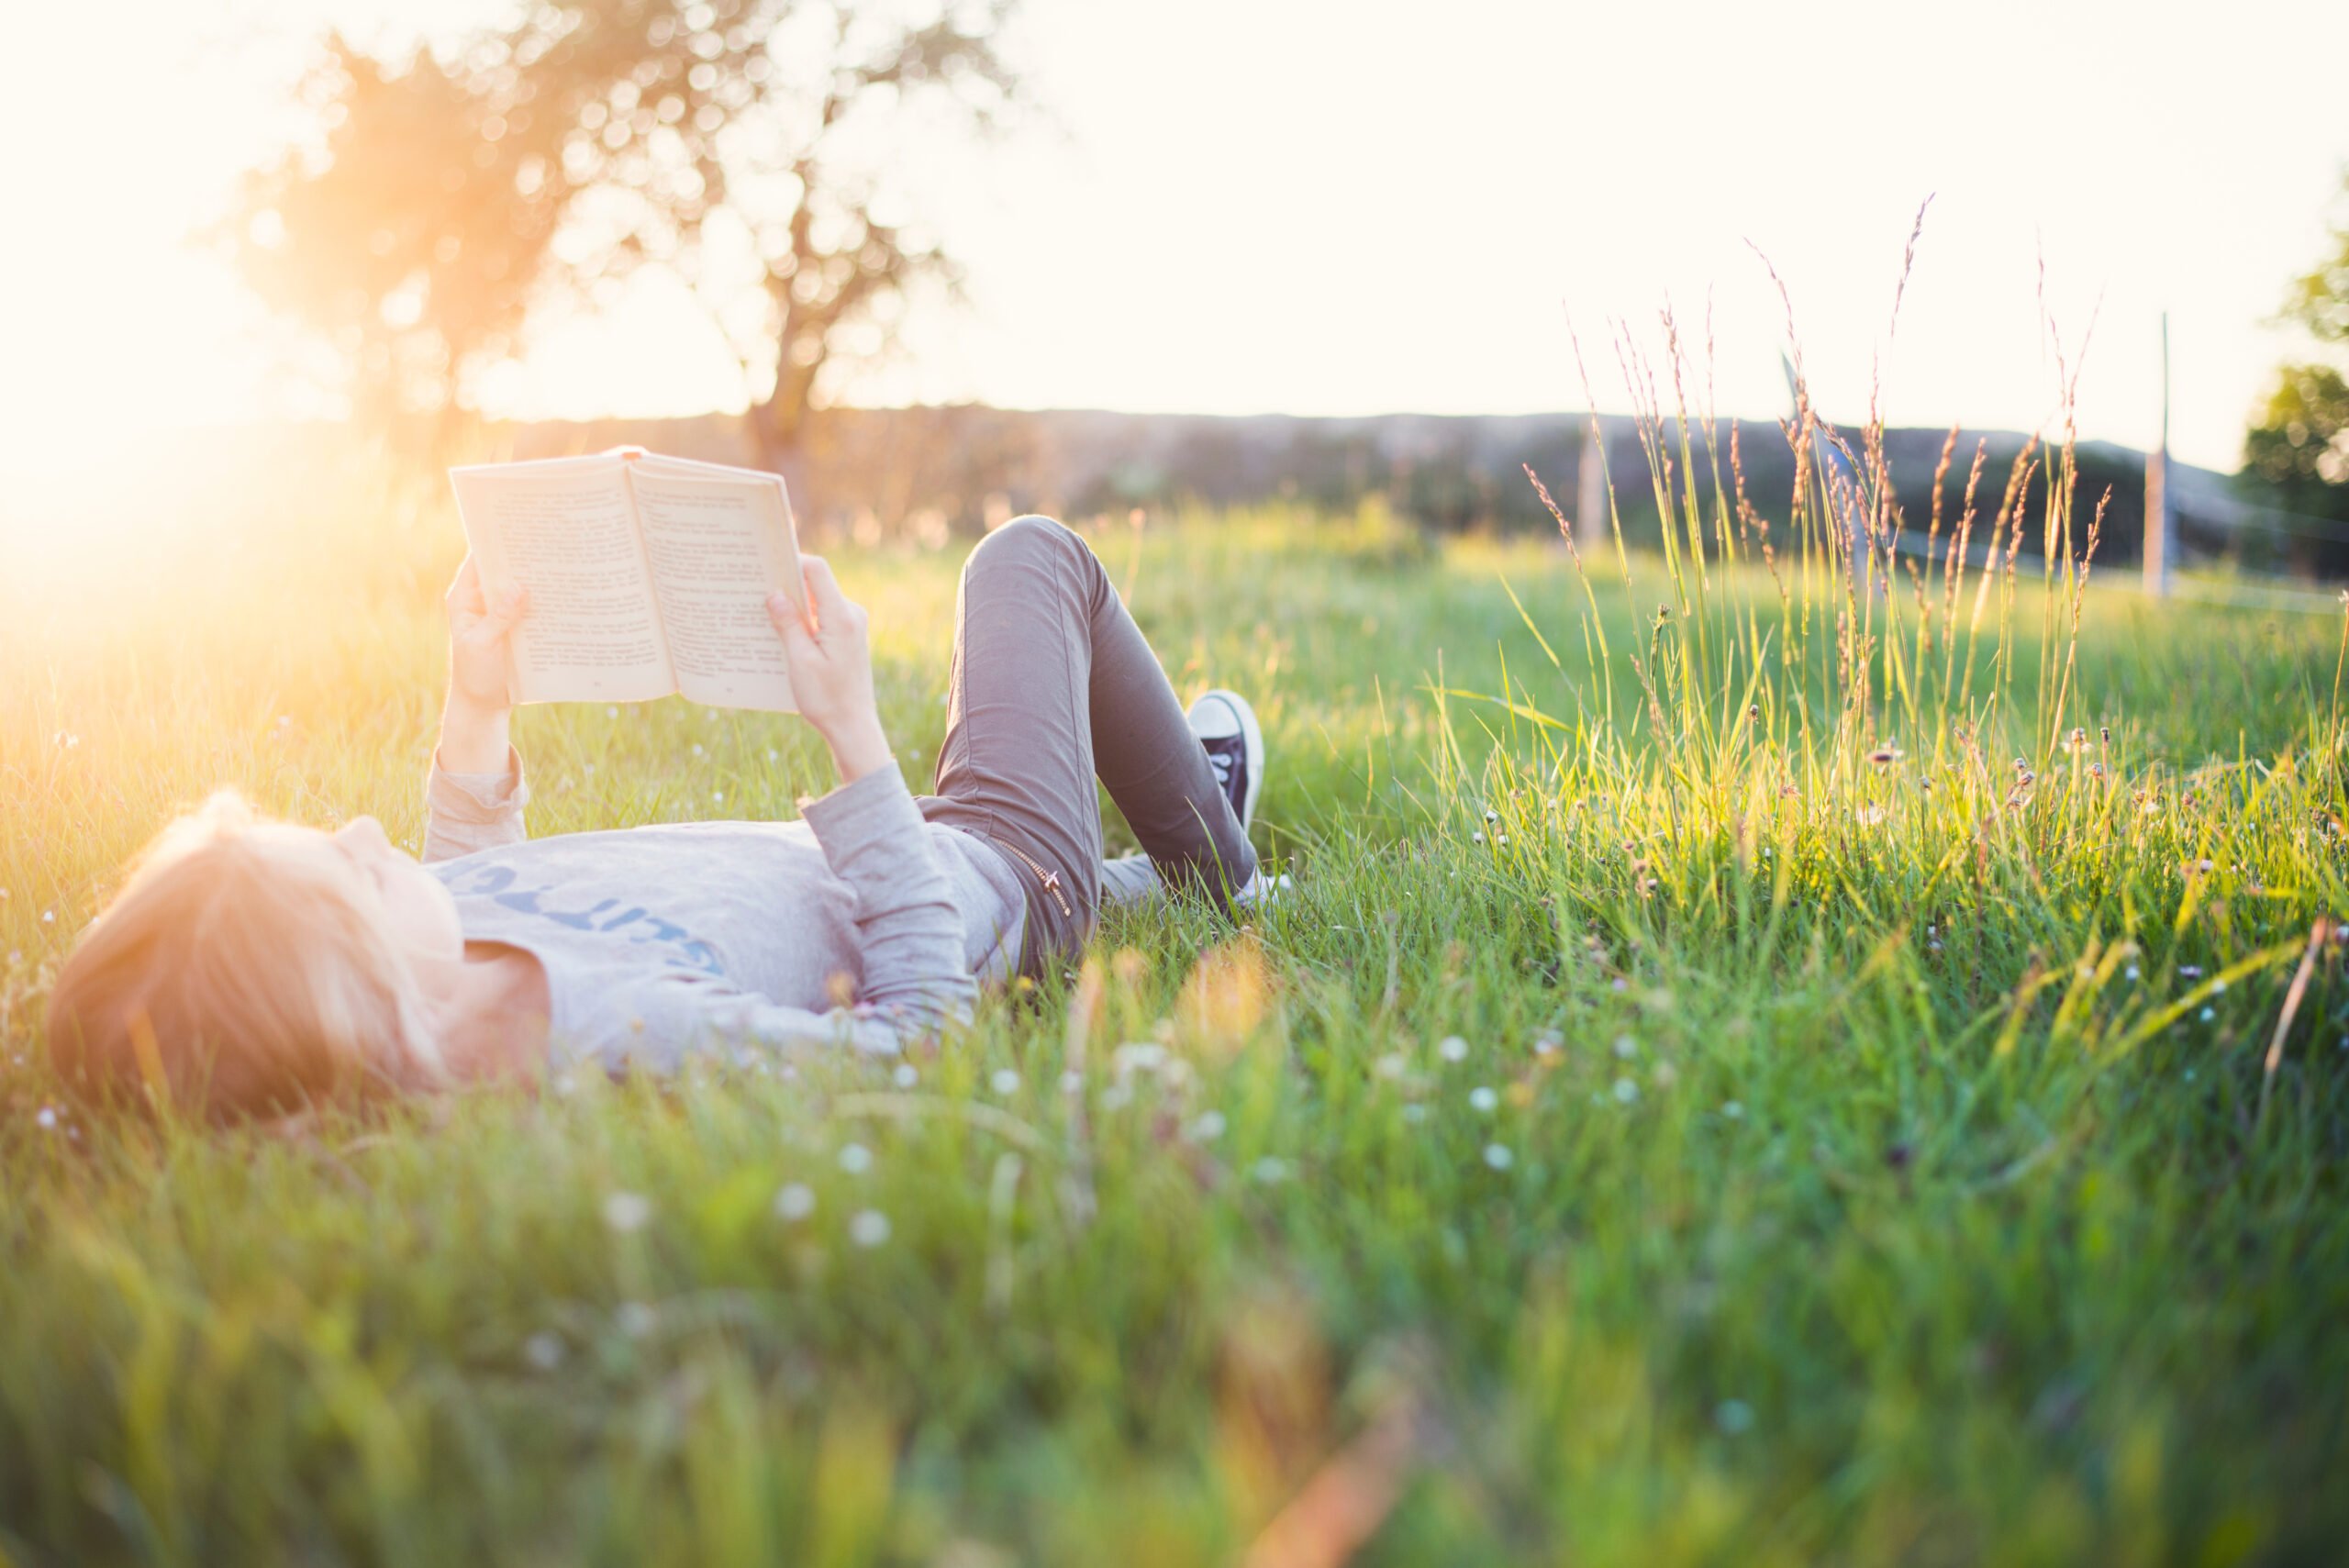 A girl reads a book while lying in the grass